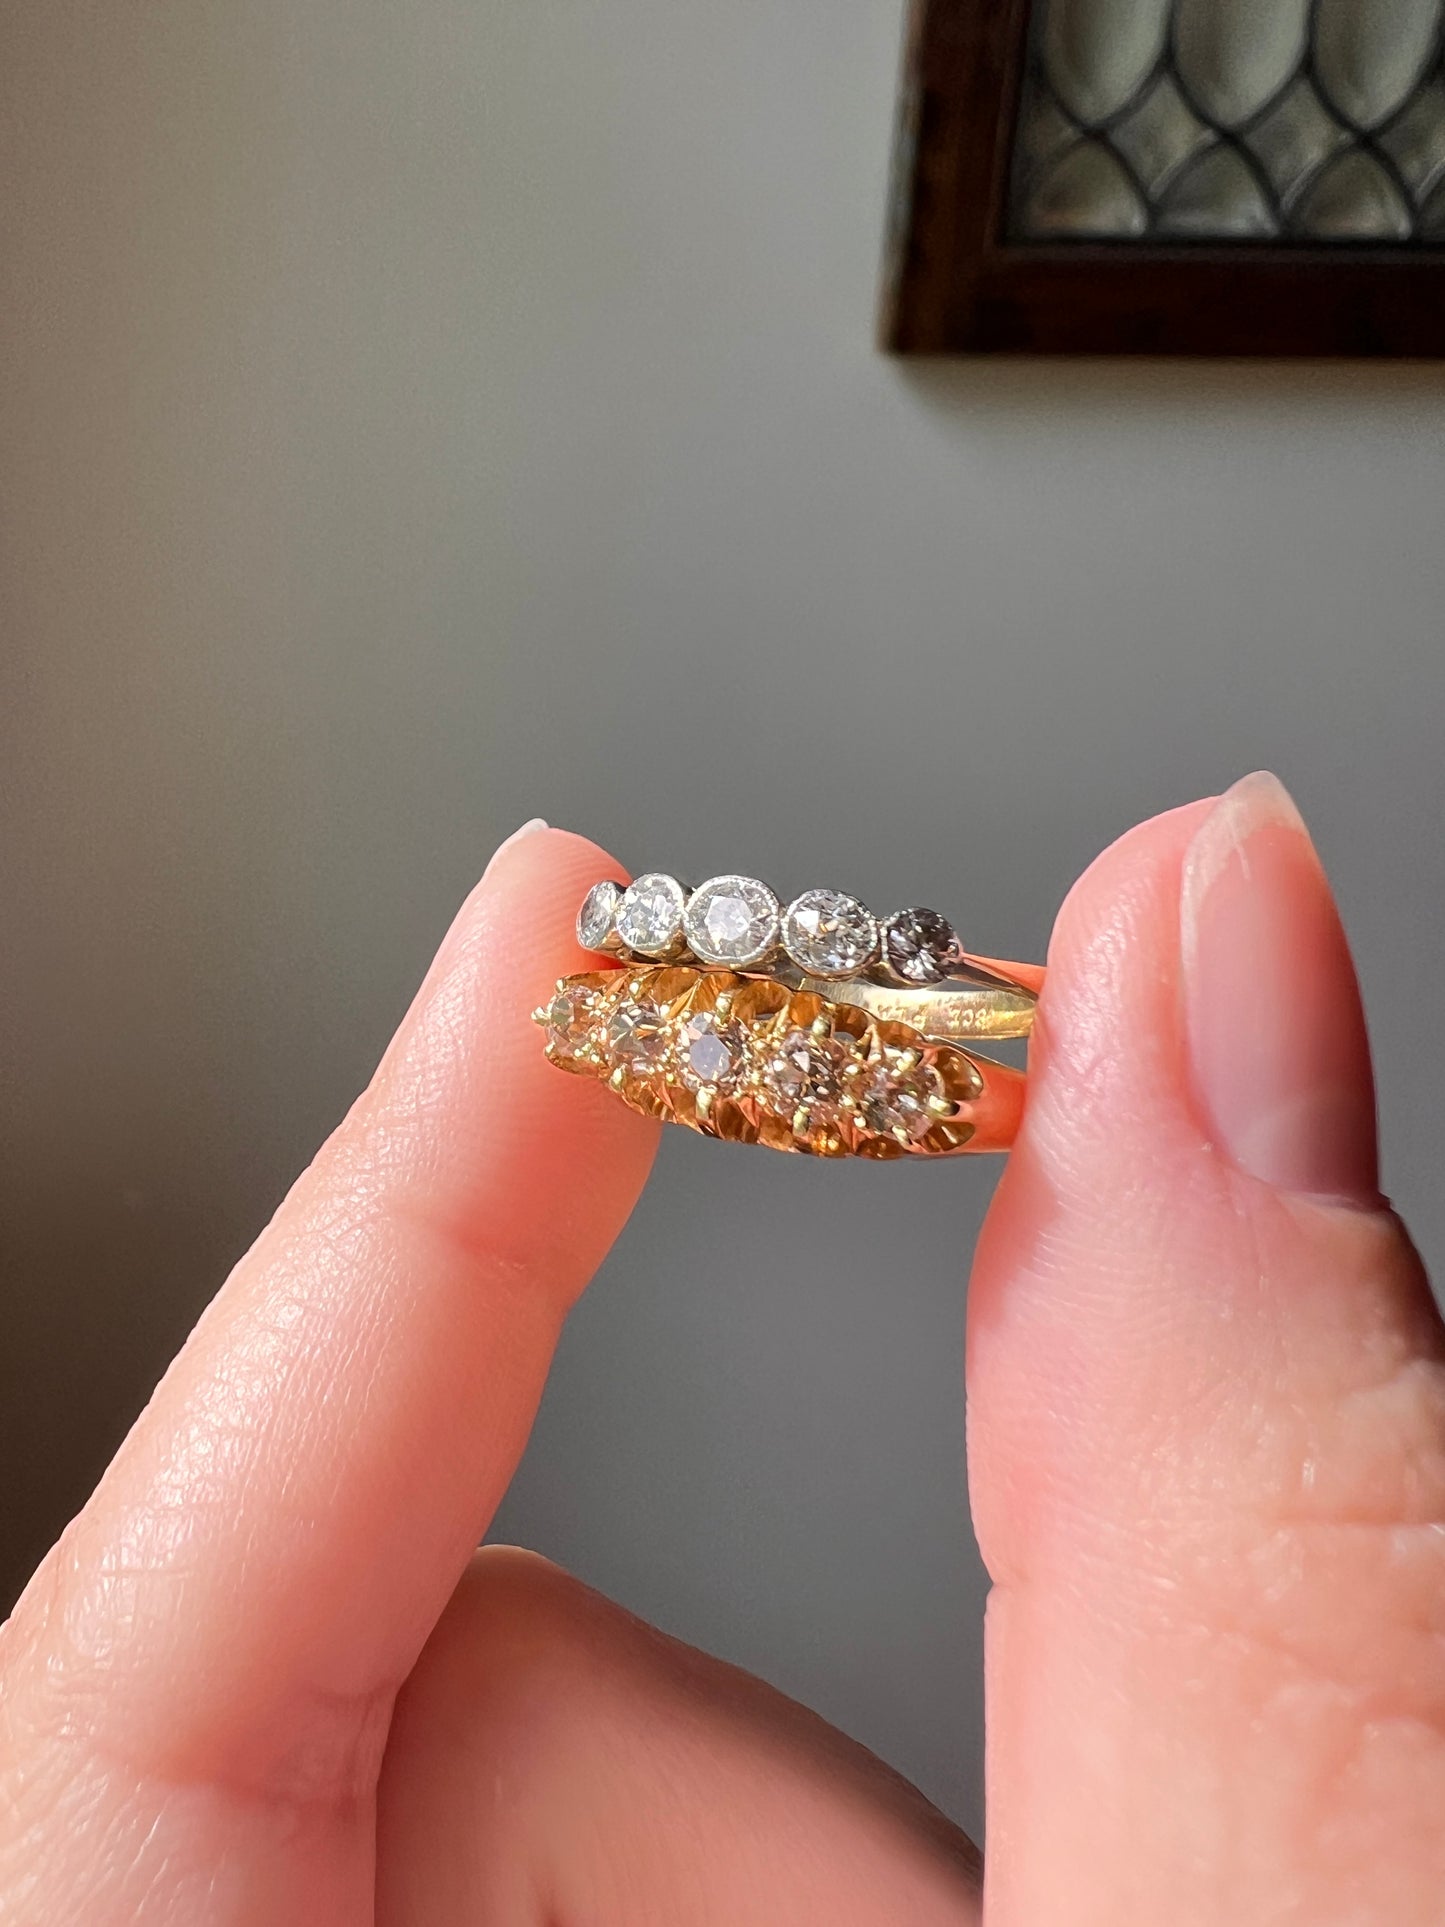 CHAMPAGNE Old Mine Cut Diamond ANTiQUE Band Ring .5ctw Five Stone Buttercup 18k GOLD Victorian Stacker